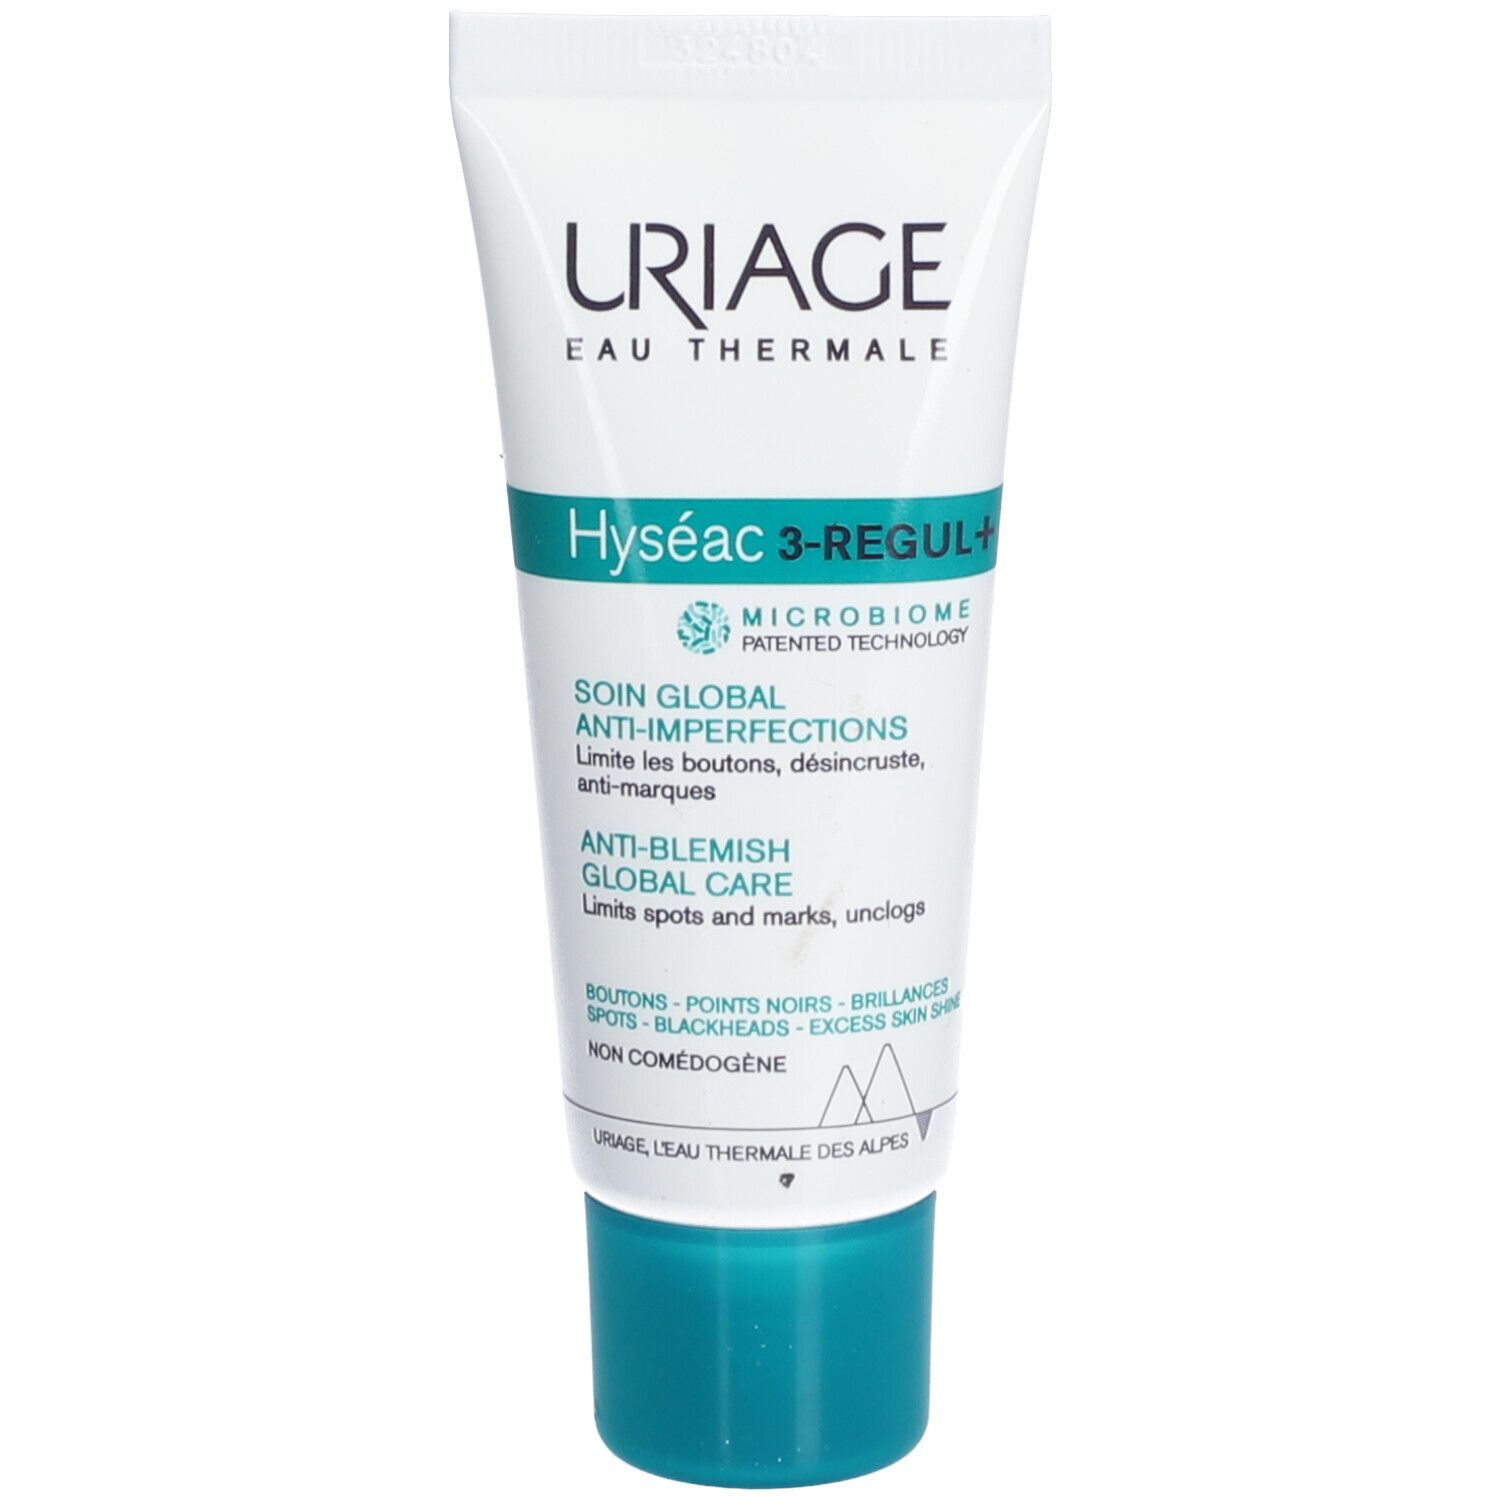 Uriage Hyséac 3-Regul+ Soin global anti-imperfections